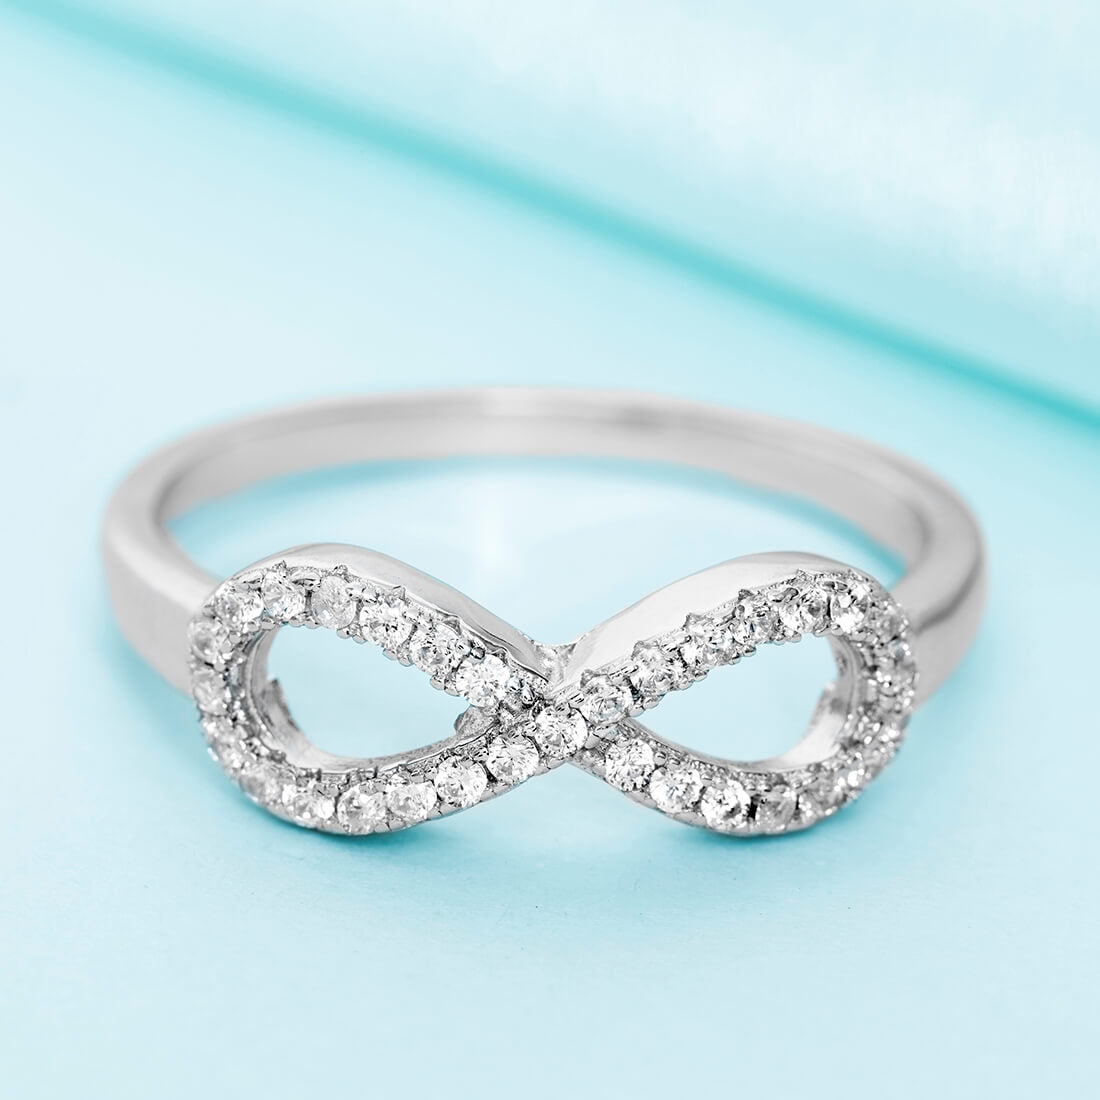 The Infinity 925 Sterling Silver Ring